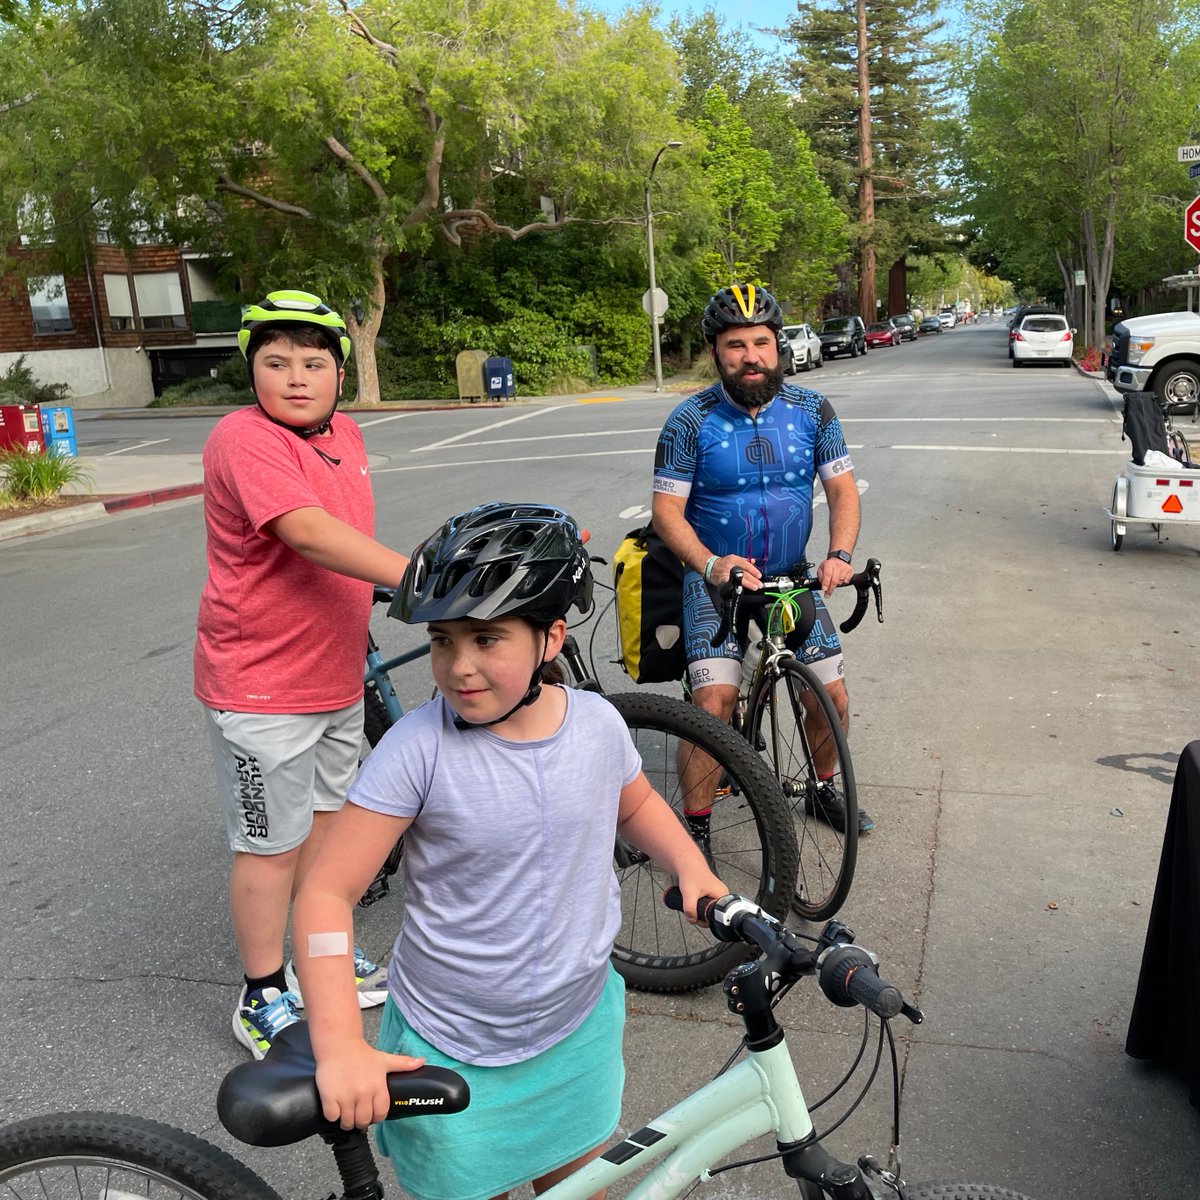 Spotted in Palo Alto: big smiles on the ride to work! Thank you to everyone who pedaled their way to work today and made #BiketoWorkDay a success 🚲